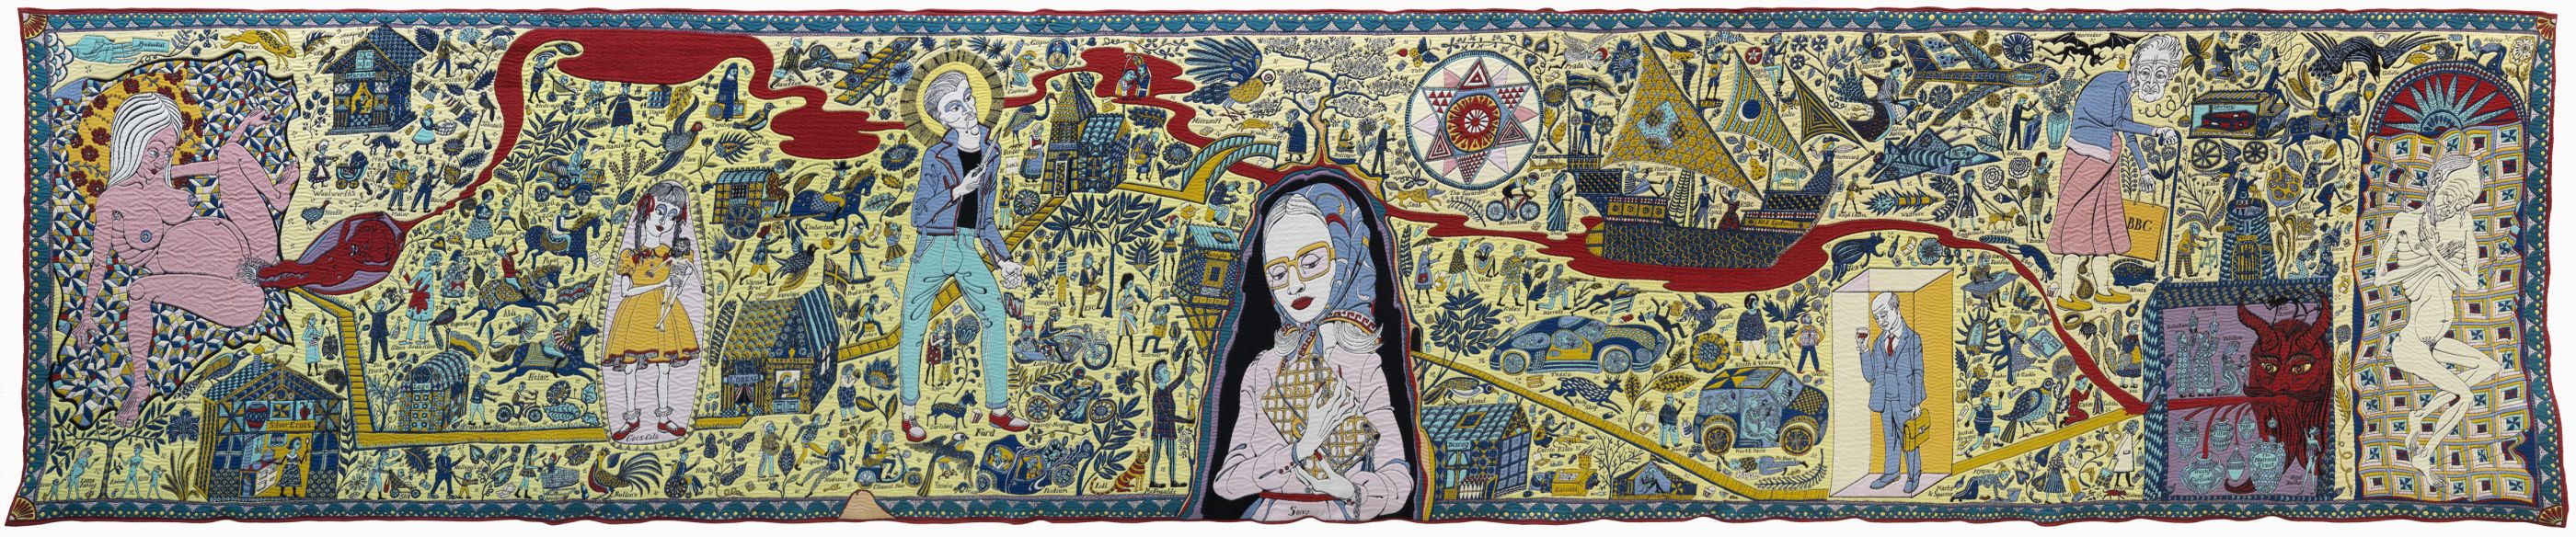 grayson_perry,_the_walthamstow_tapestry,_2009,_courtesy_the_artist_and_victoria_miro_london